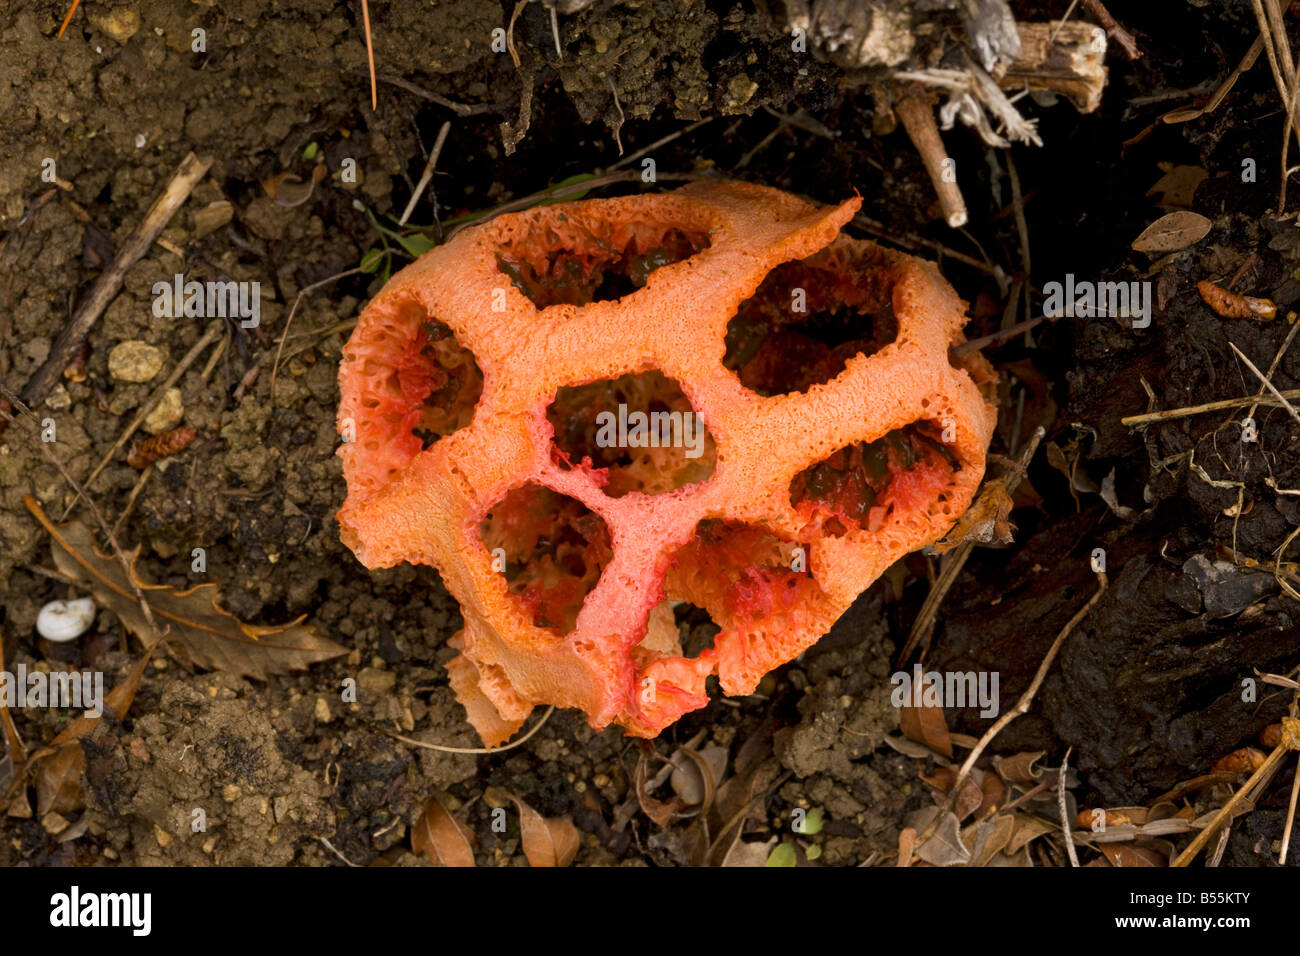 latticed stinkhorn (Clathrus ruber) emerging from soil spring, close-up, Andalucia Spain Stock Photo